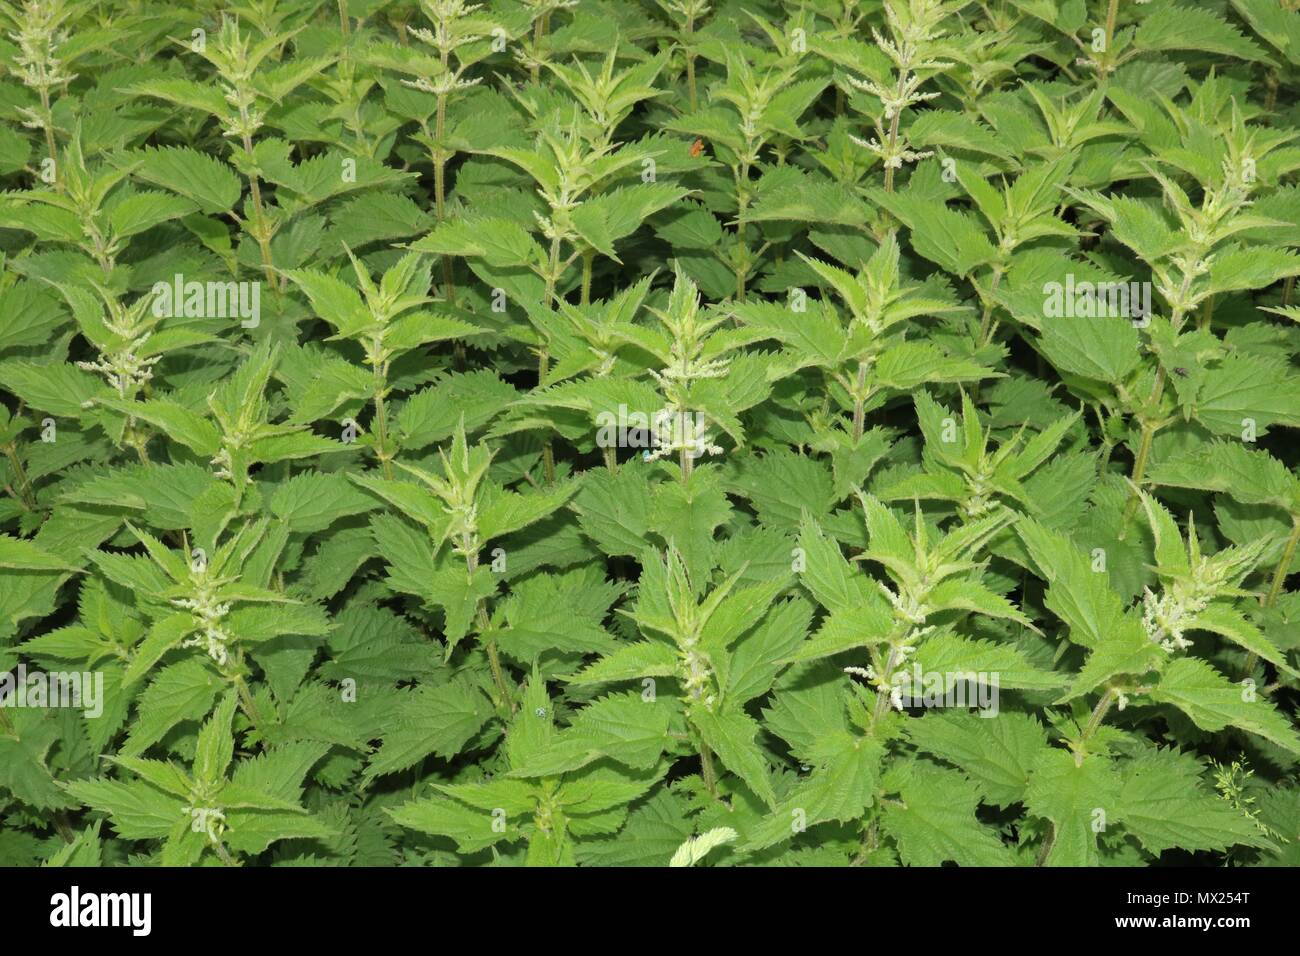 Urtica Dioica / Common Nettle, Stinging Nettle / Nettle Leaf Background Stock Photo